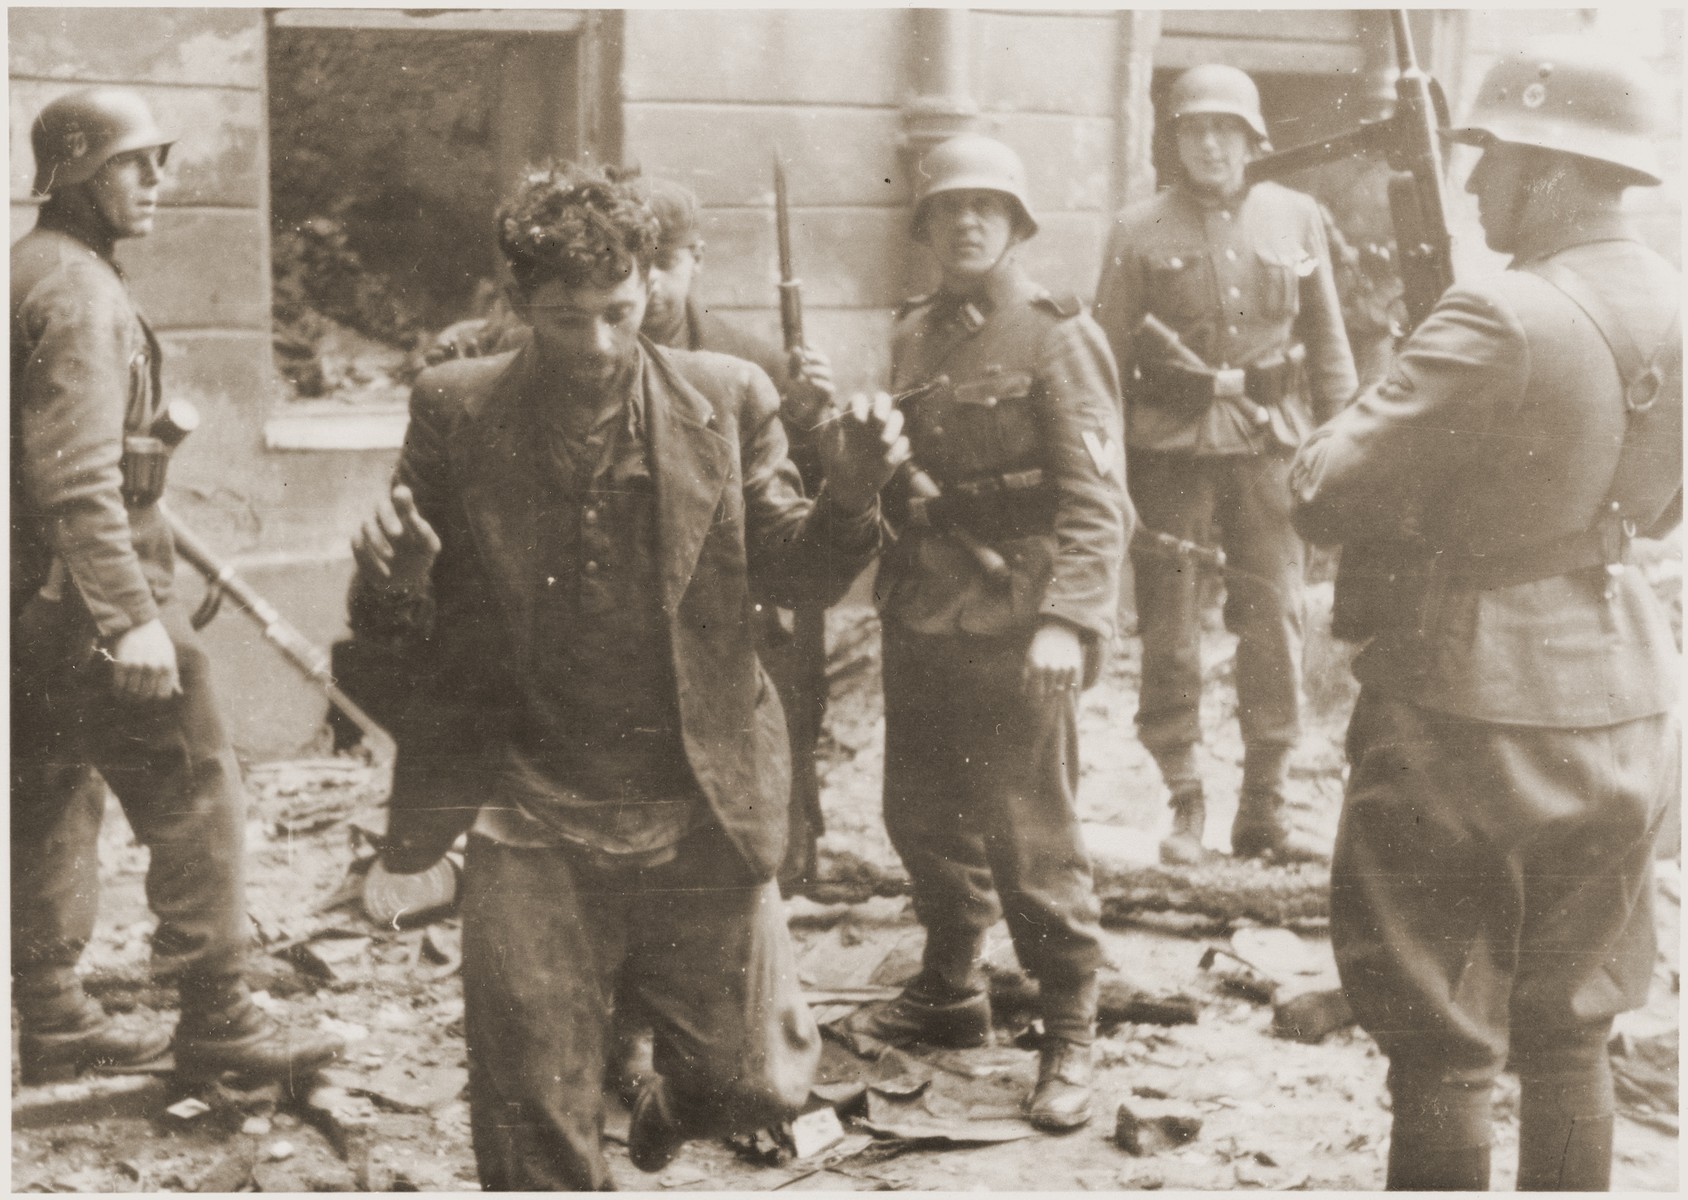 SS assault troops capture two Jewish resistance fighters pulled from a bunker during the suppression of the Warsaw ghetto uprising.  

The original caption (translated from German reads alternately: "Pulled from a bunker" or "Bandits."